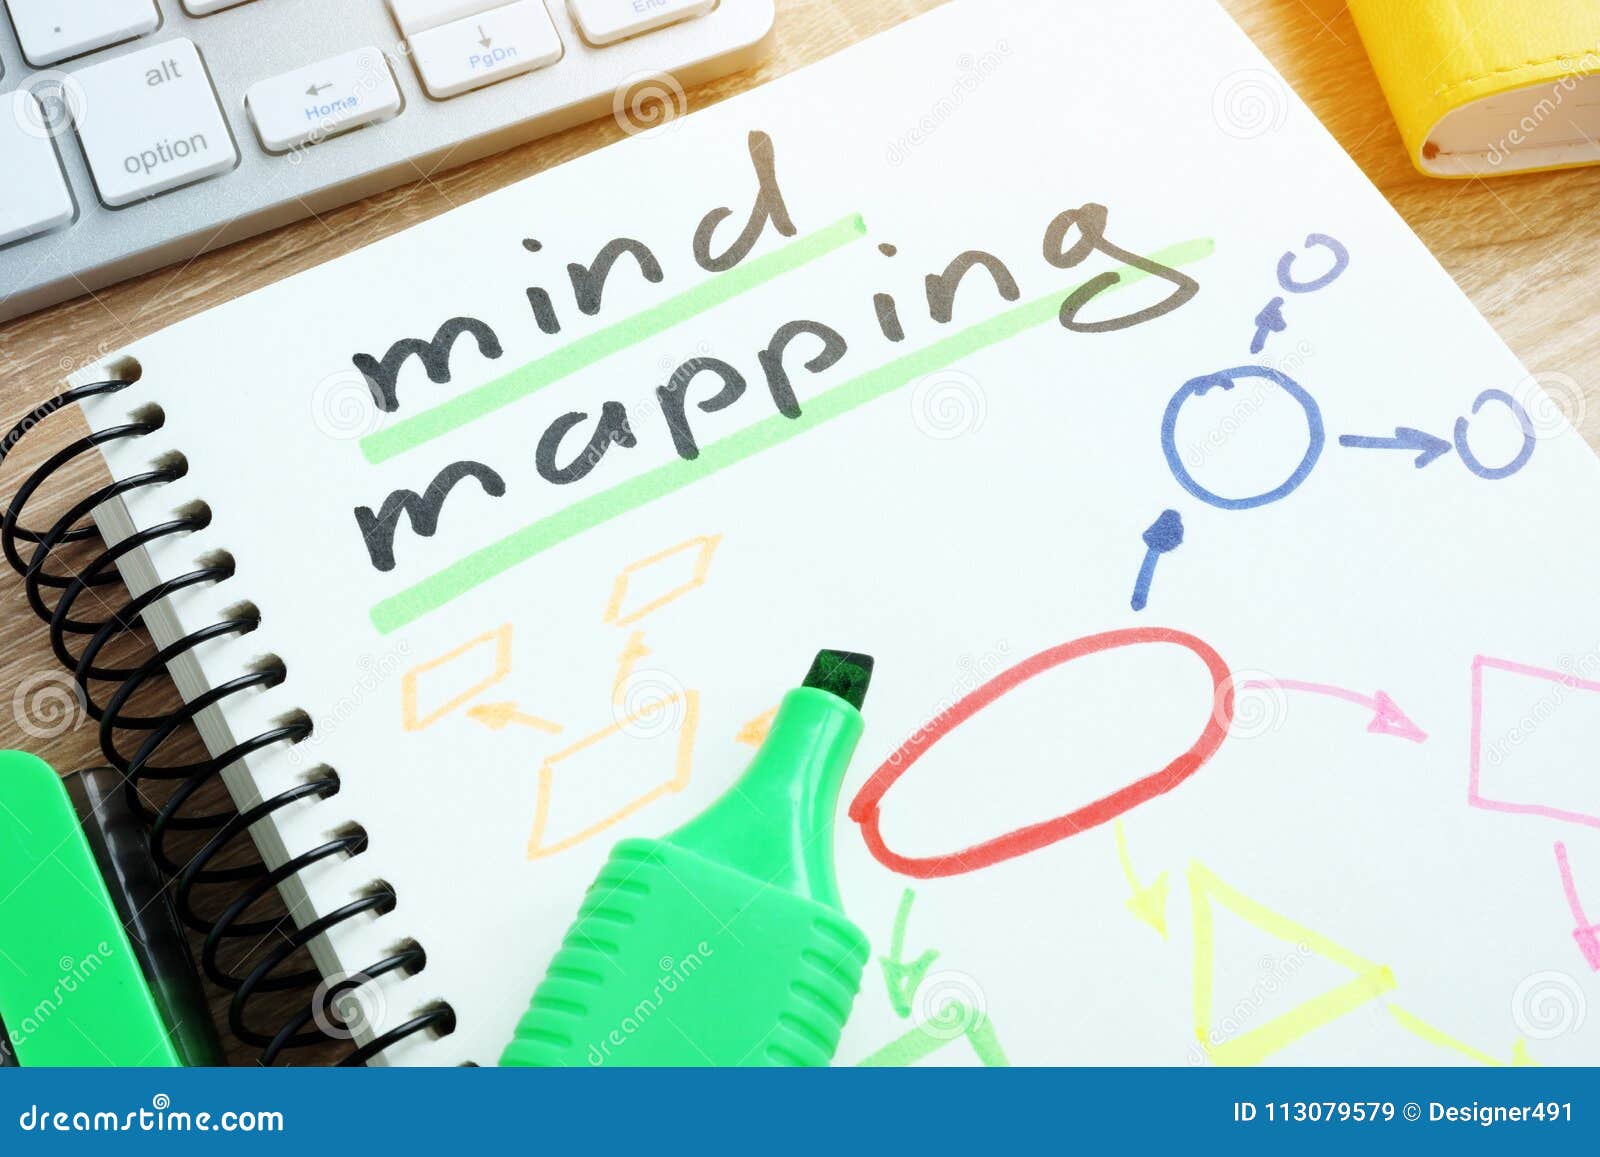 note with mind mapping on a desk.